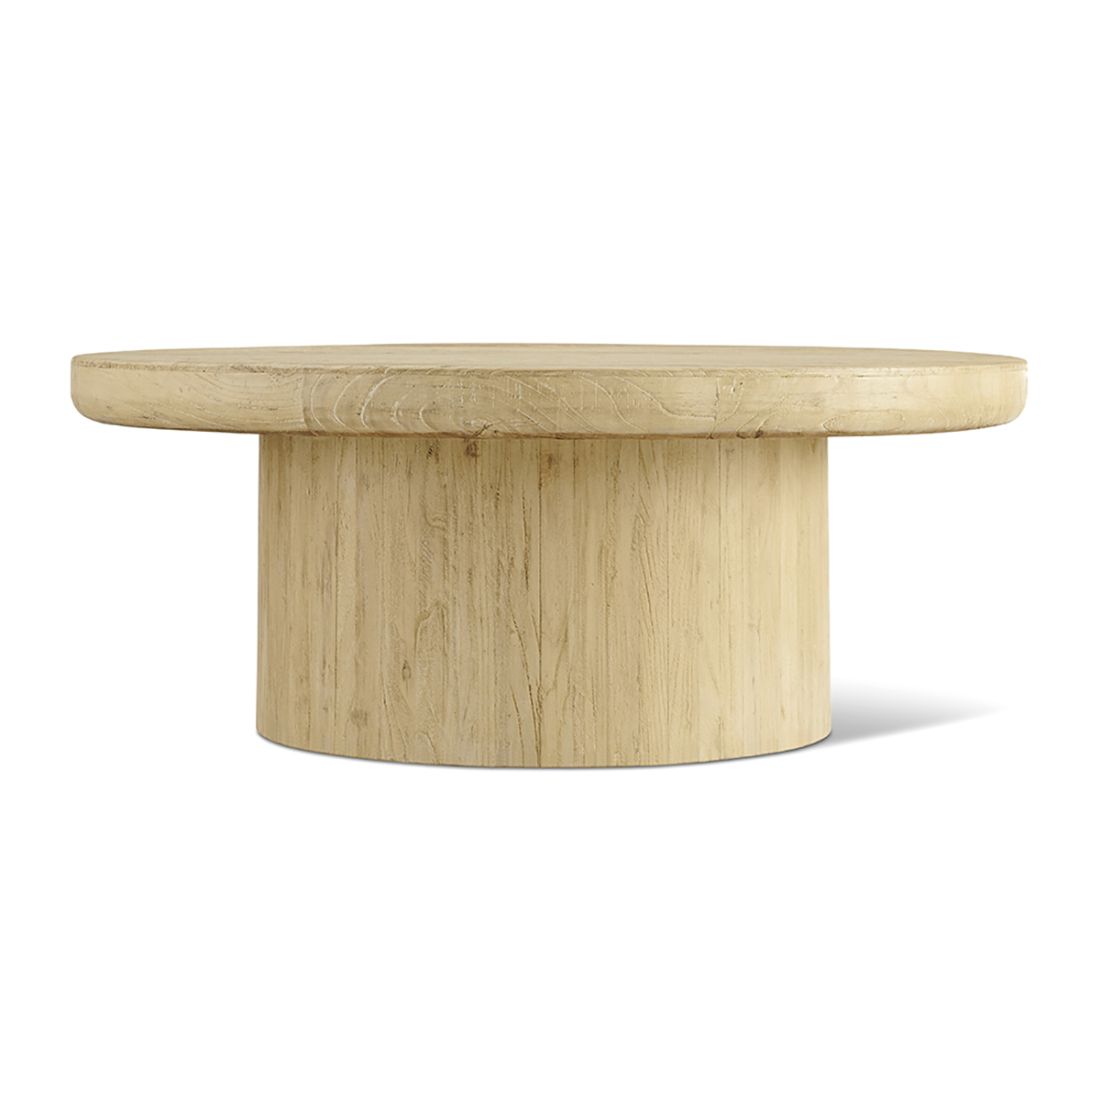 EM Wabisabi Round Light Natural Reclaimed Wood Coffee Table with Round Pedestal Base | Eternity Modern